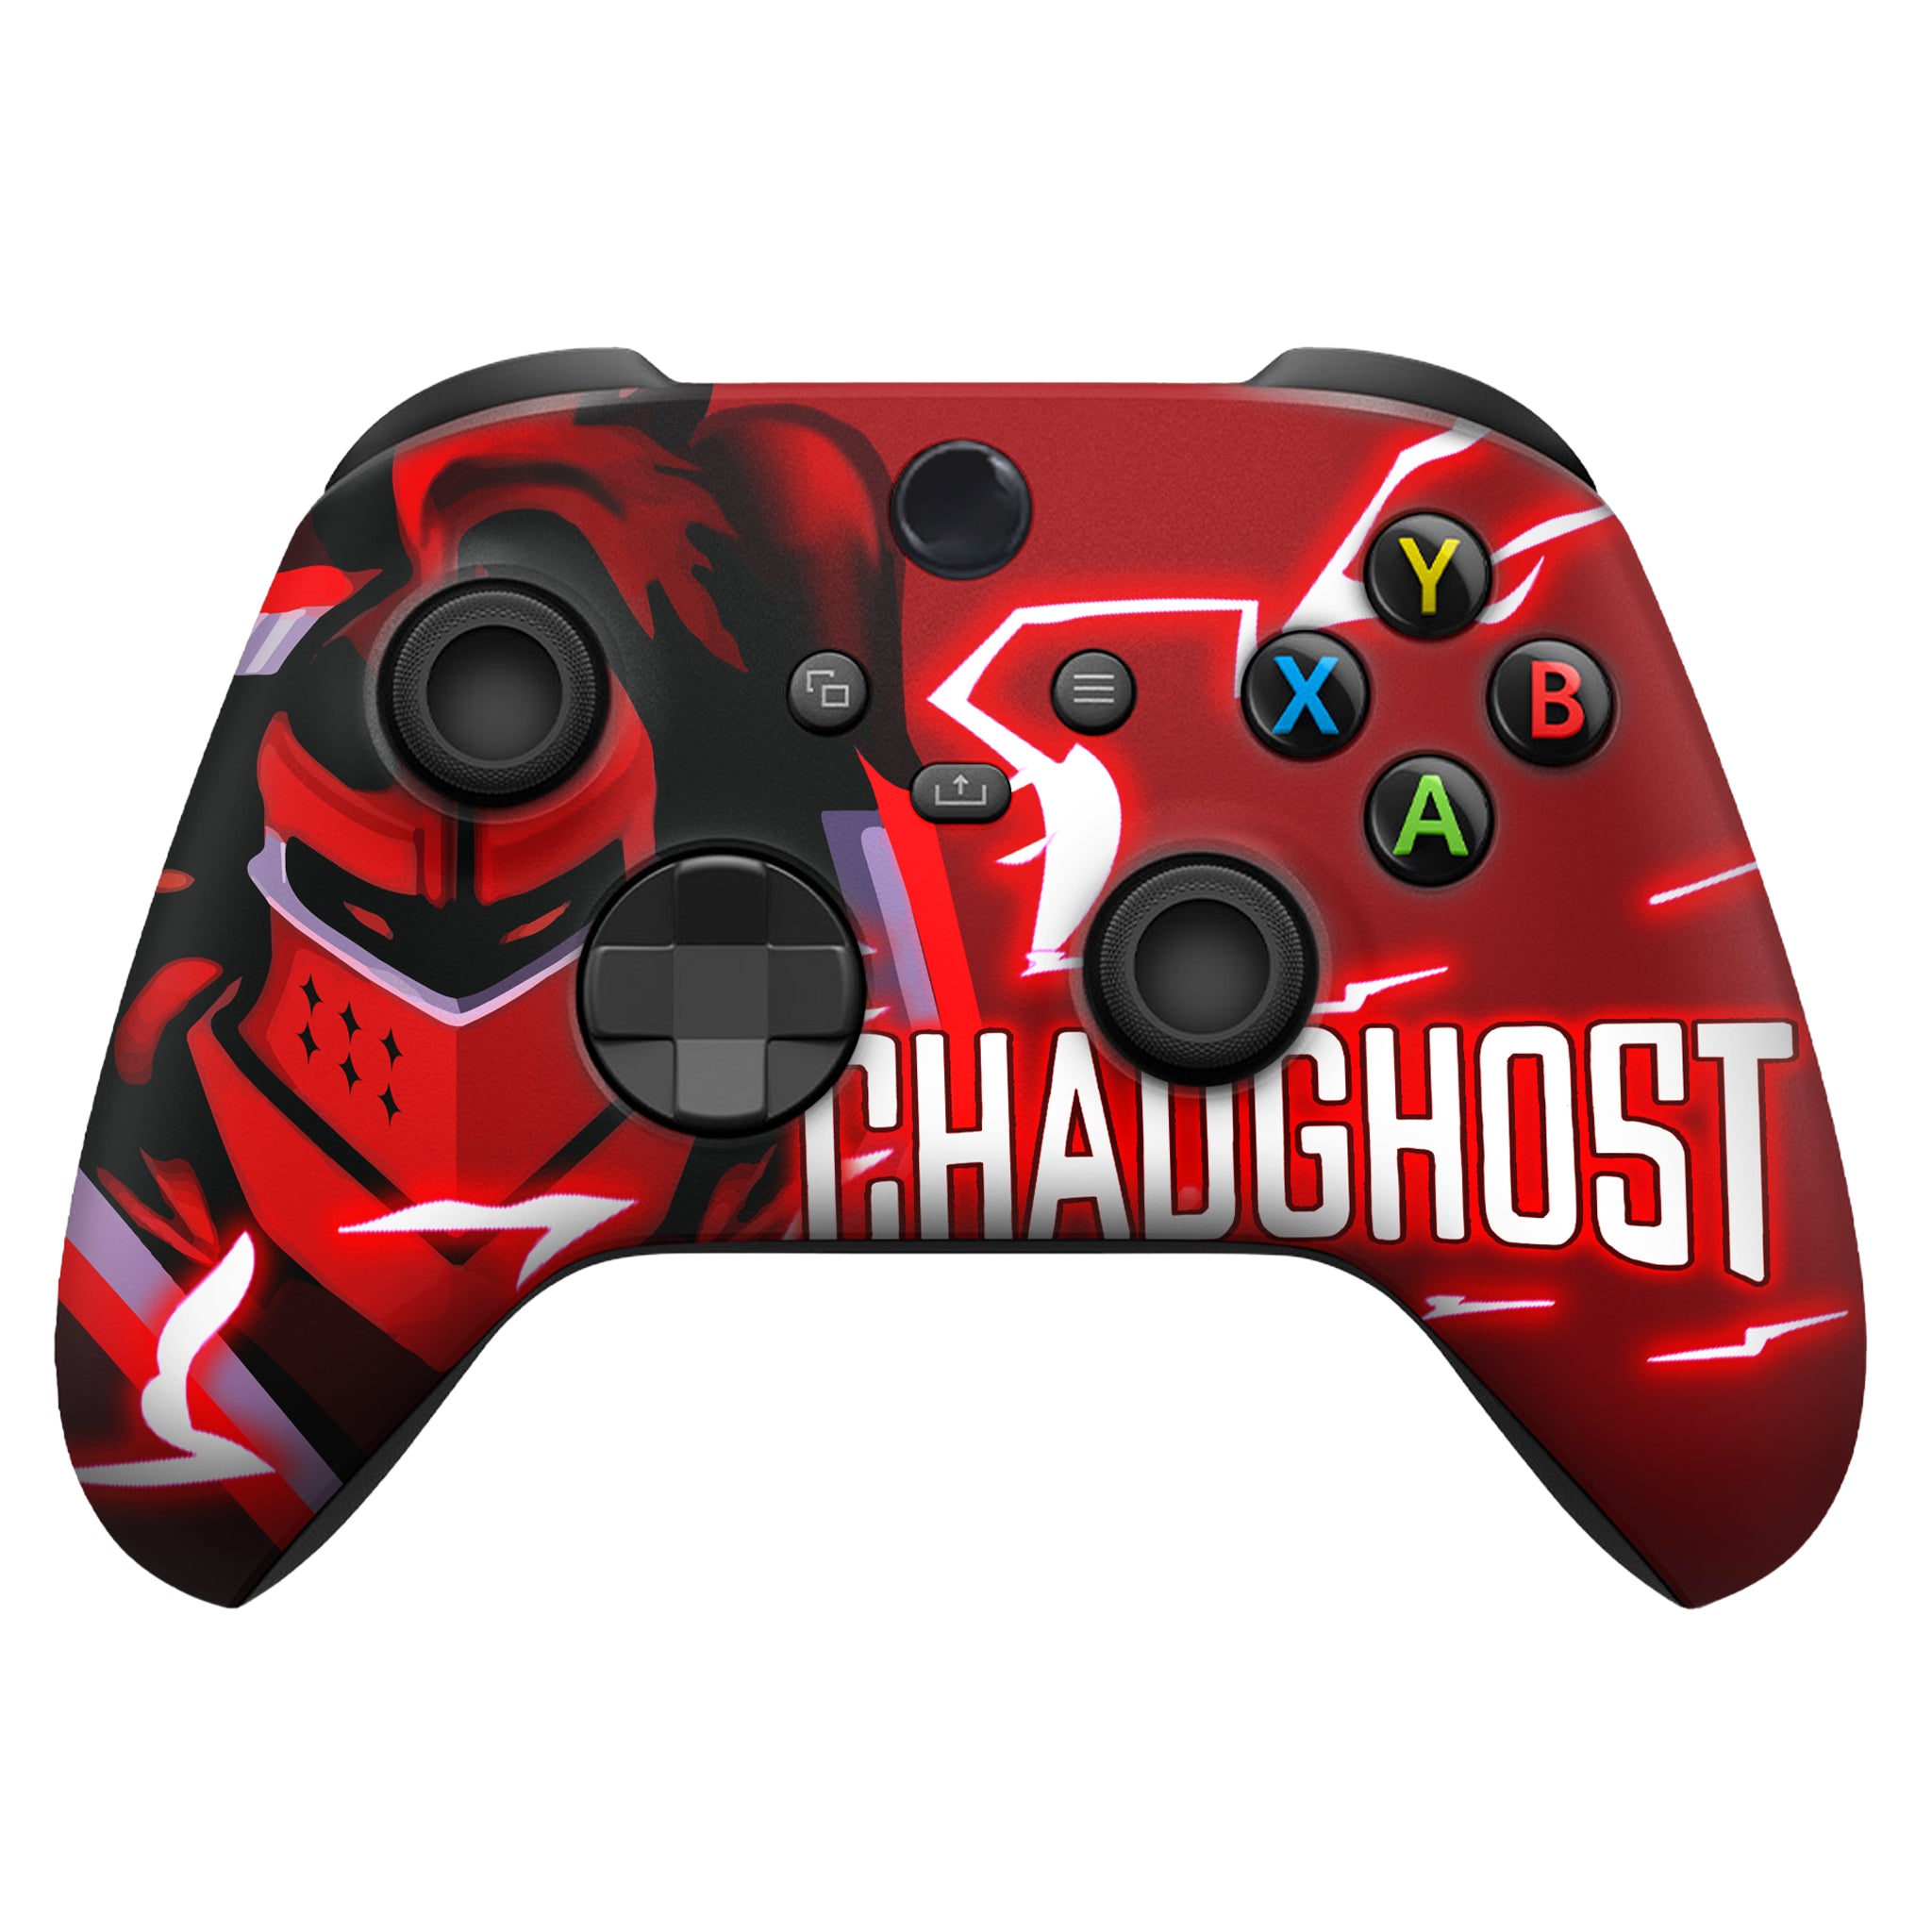 Chad Ghost Xbox Series X Controller